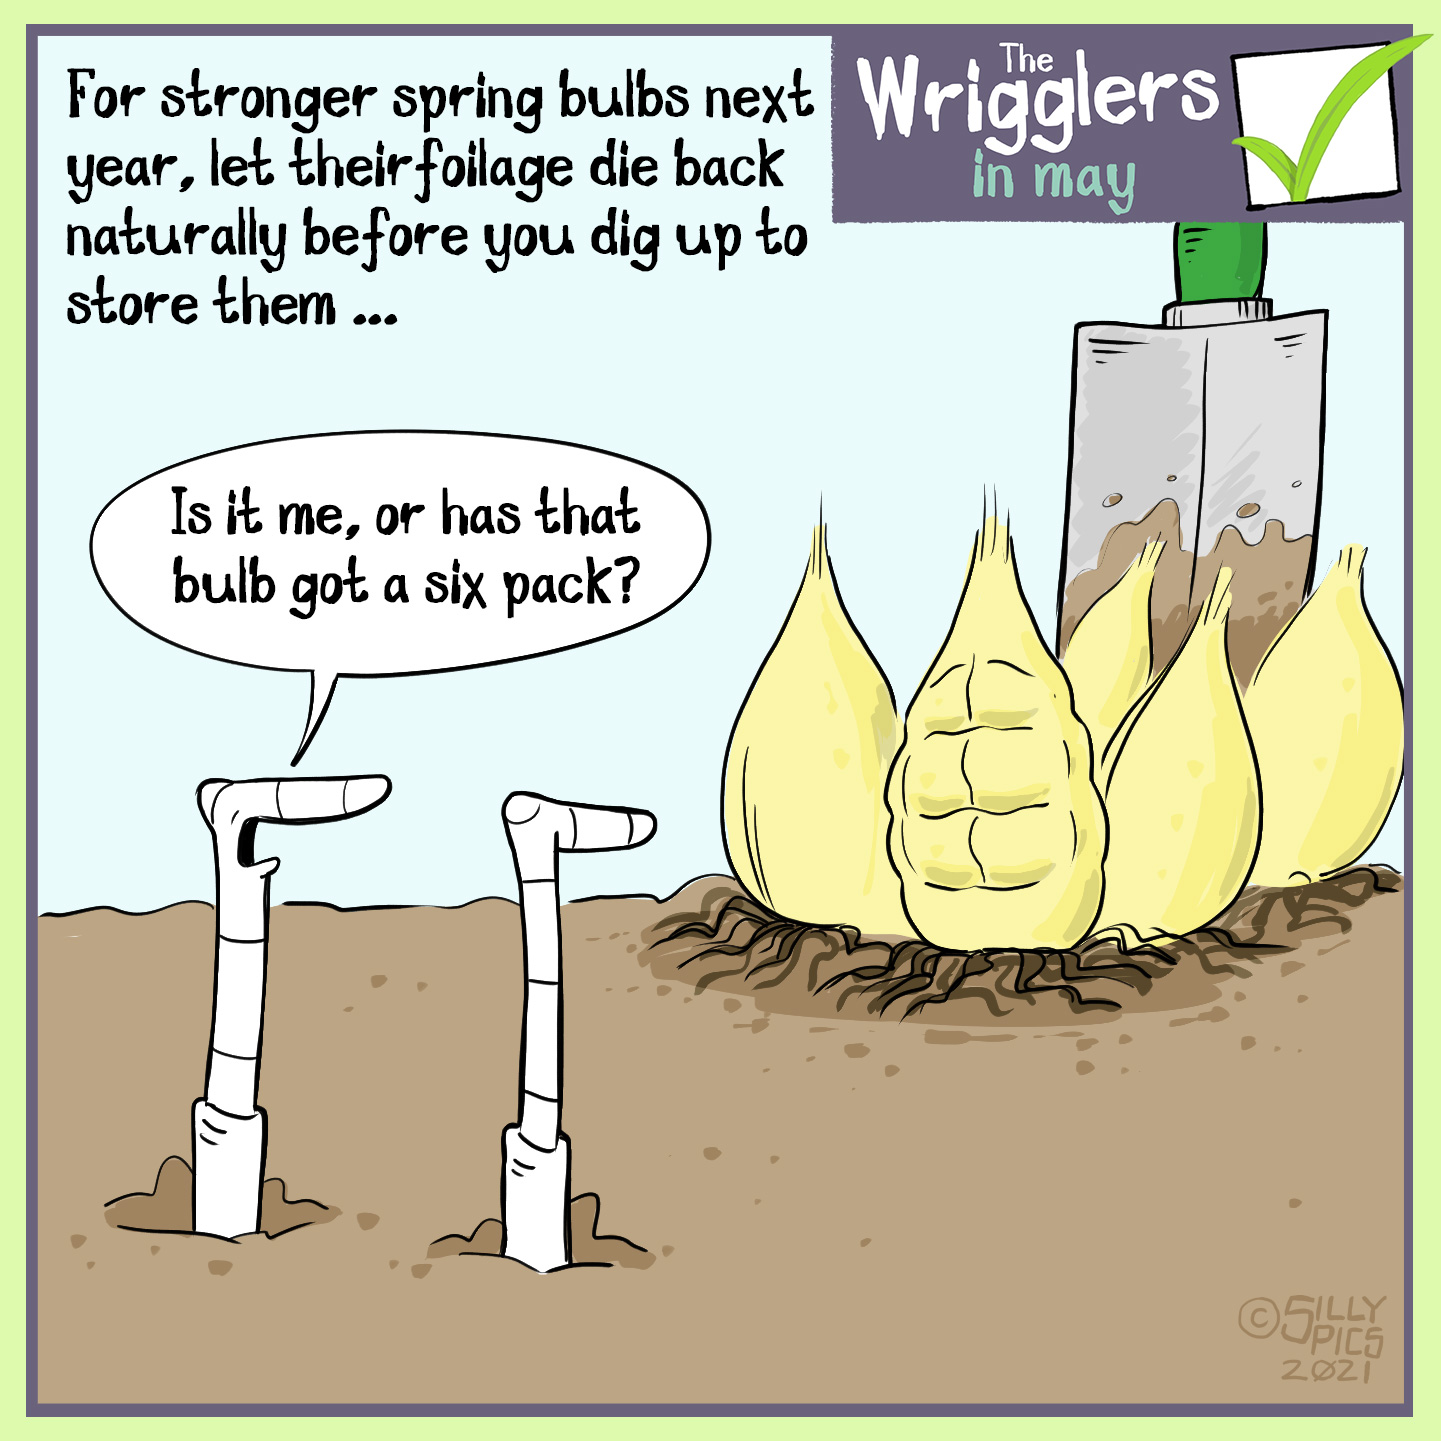 The headline says, “ For stronger bulbs next year, let their foliage die back naturally before you dig up and store them …The cartoon shows two worms looking at some bulbs that have been dug up. One of the bulbs is rippled in what looks like muscle. One of the worms says, “Is it me or has that bulb got a six pack?”